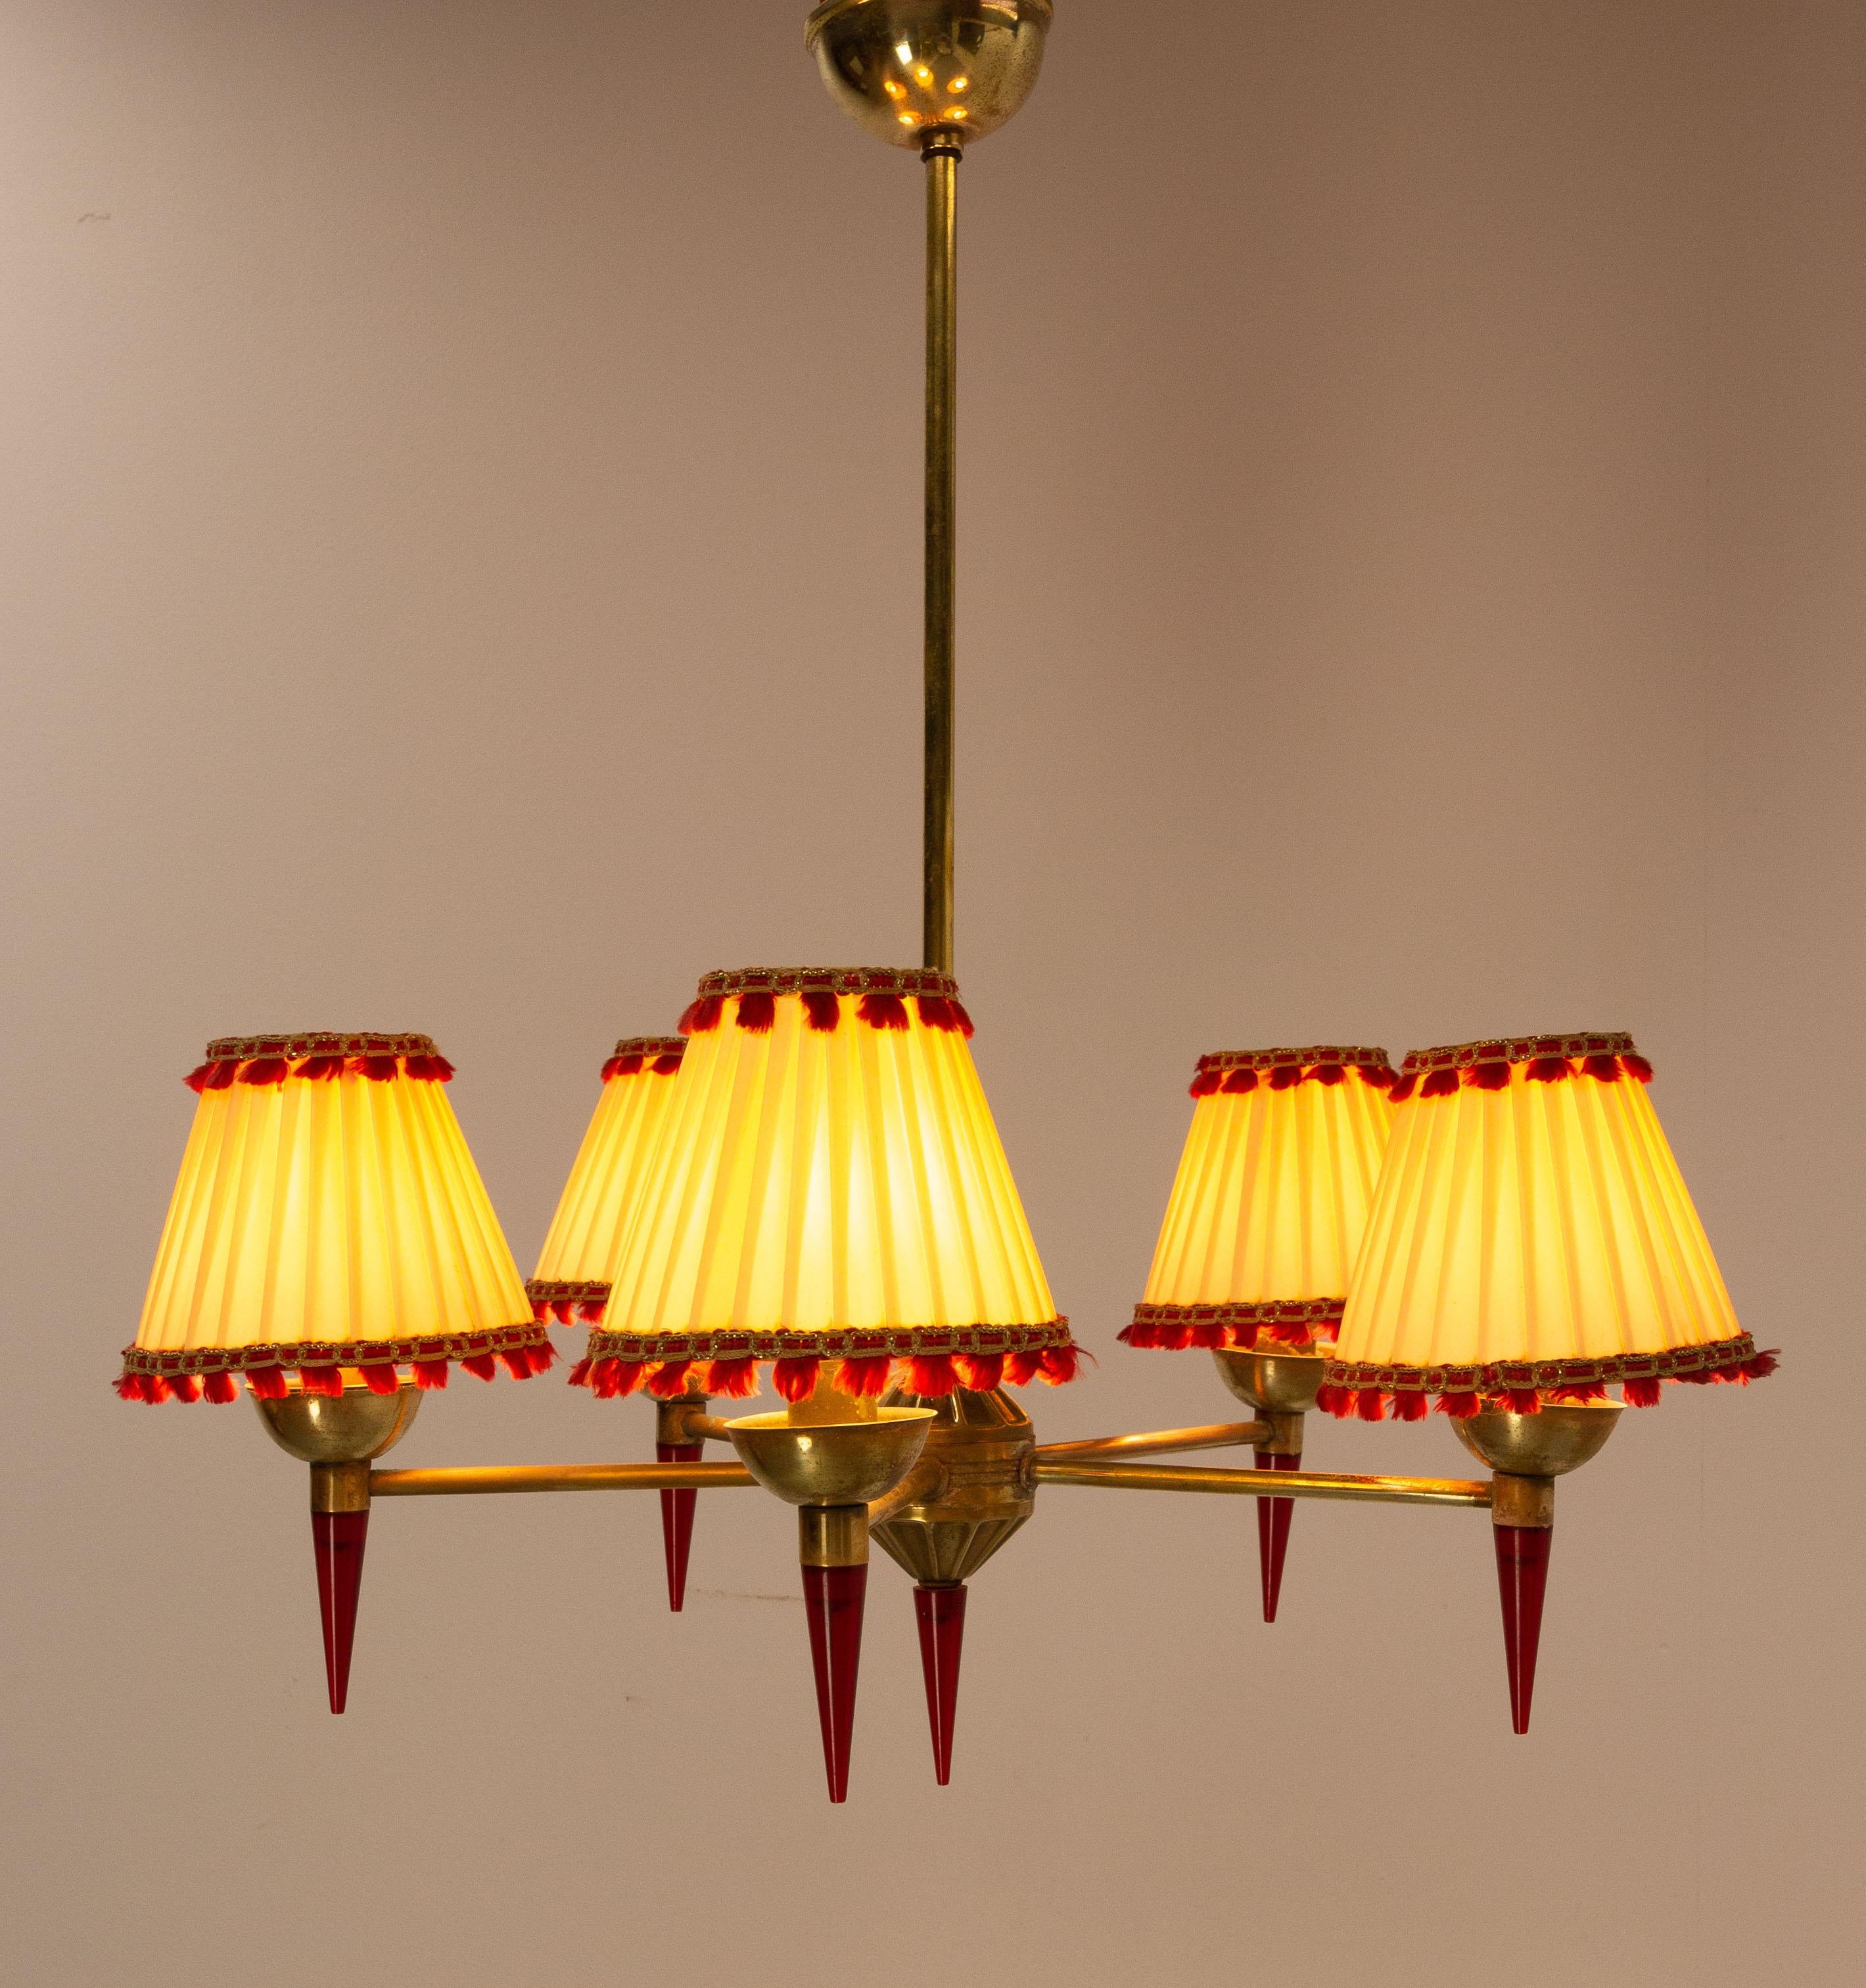 Pendant light chandelier, France, midcentury
Lampshade in very good condition, but that you can change according to your tastes
Brass and red resin reminiscent of stalactites.
Five lamps.

Good condition

Shipping:
41 / 41 / 58 cm 1.2kg.